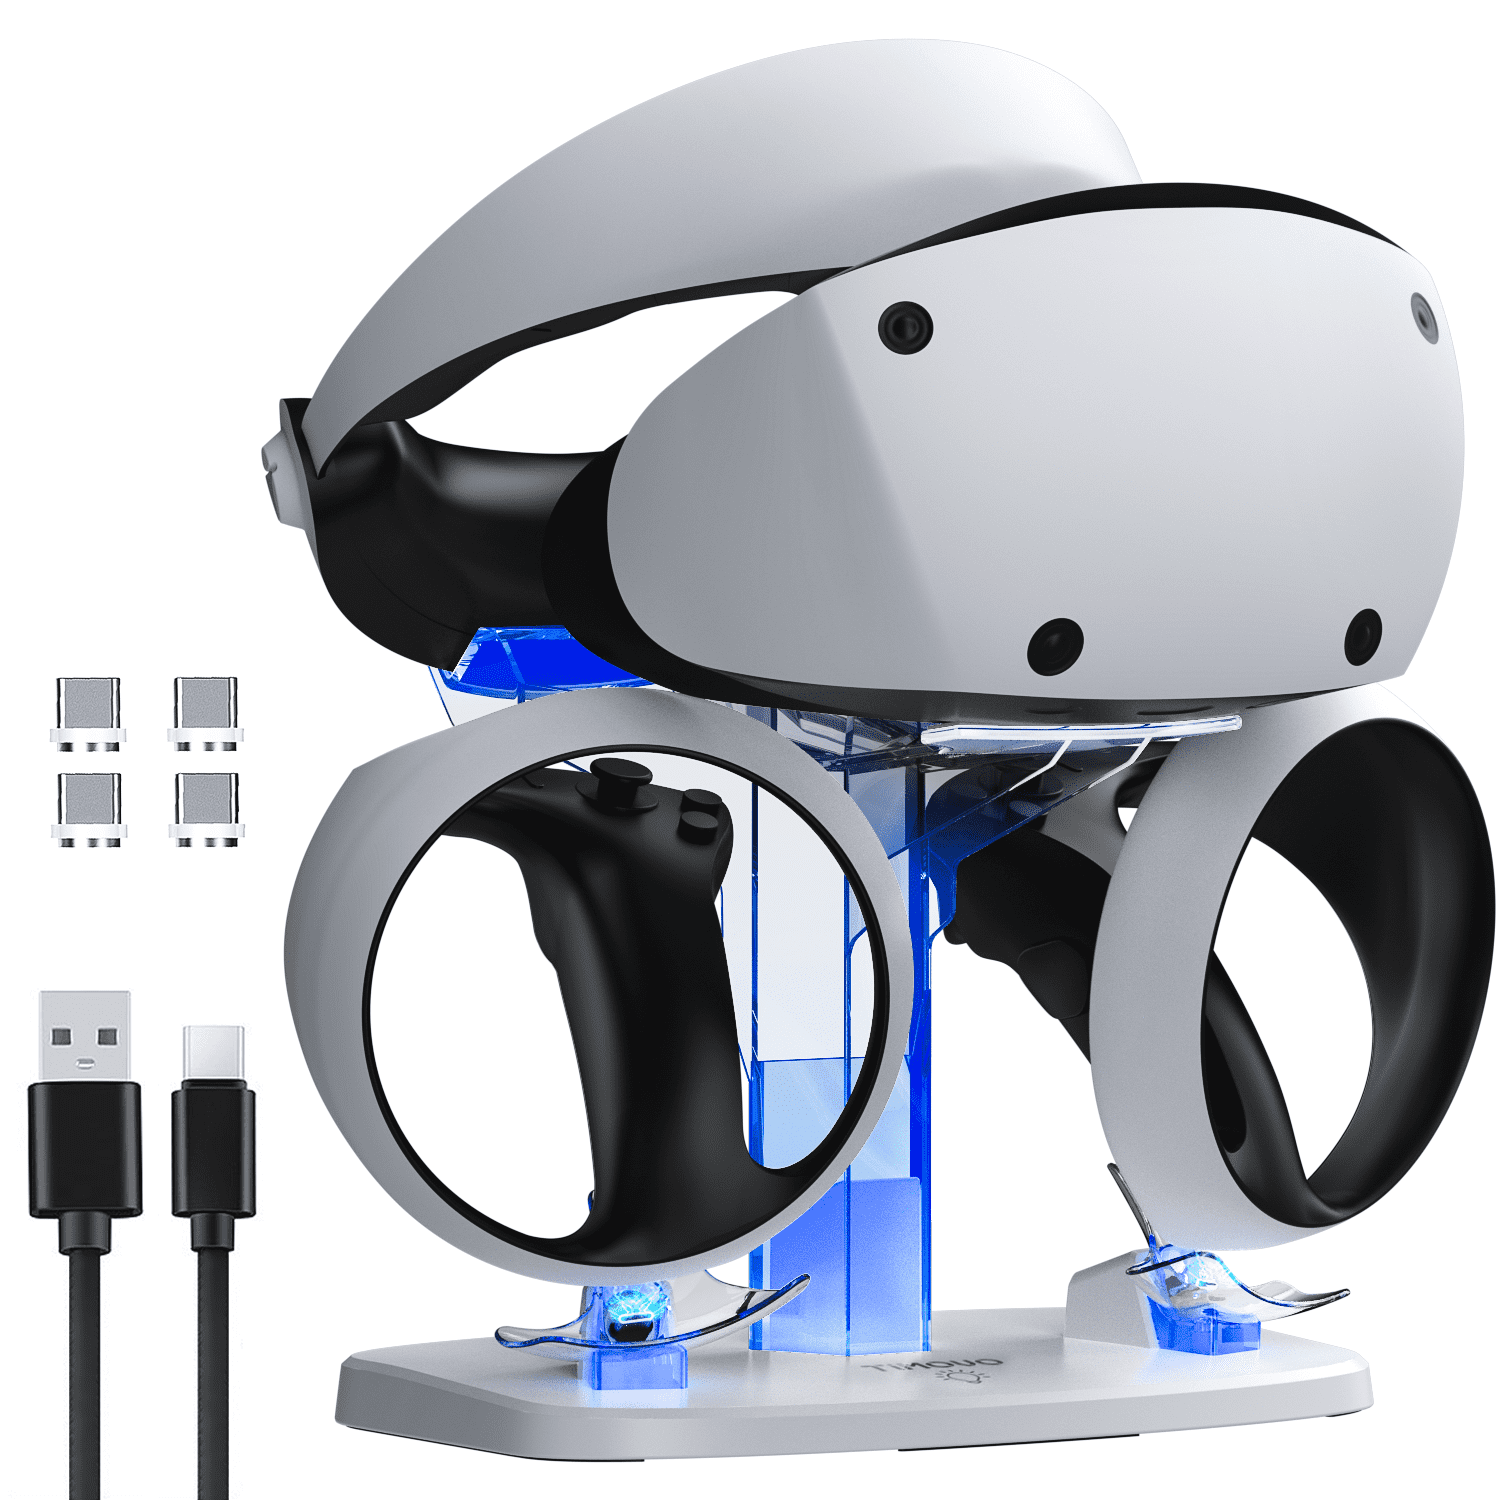 PSVR 2 Orders Are Starting to Ship in the US — Report